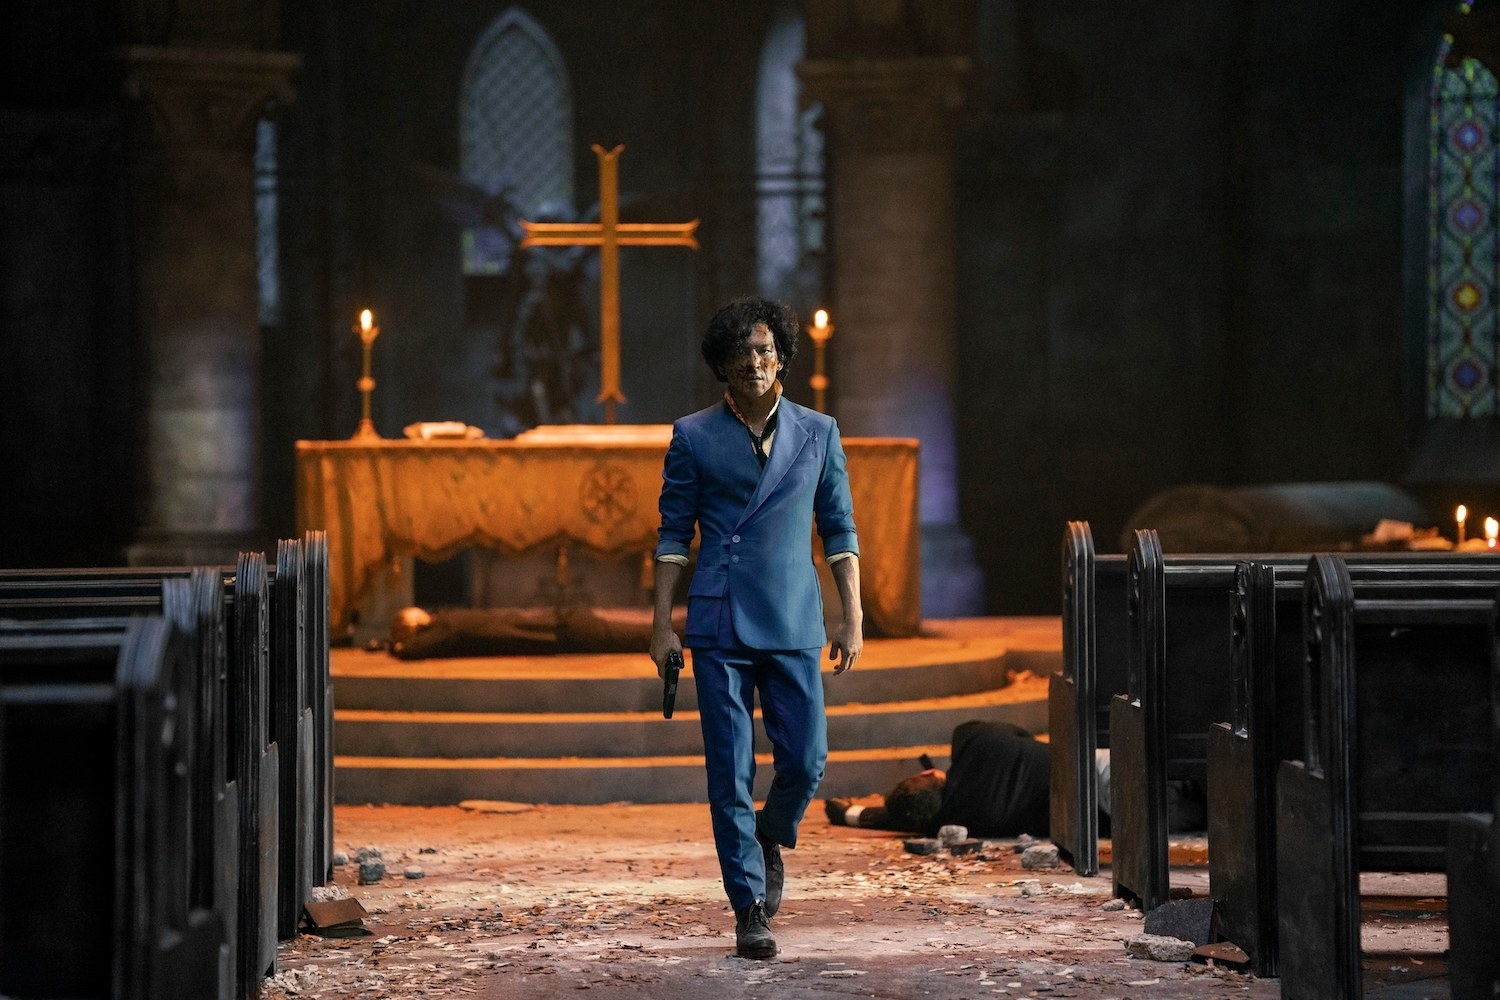 Cho as a battered and bloody Spike walking through a church with rubble and bodies around him